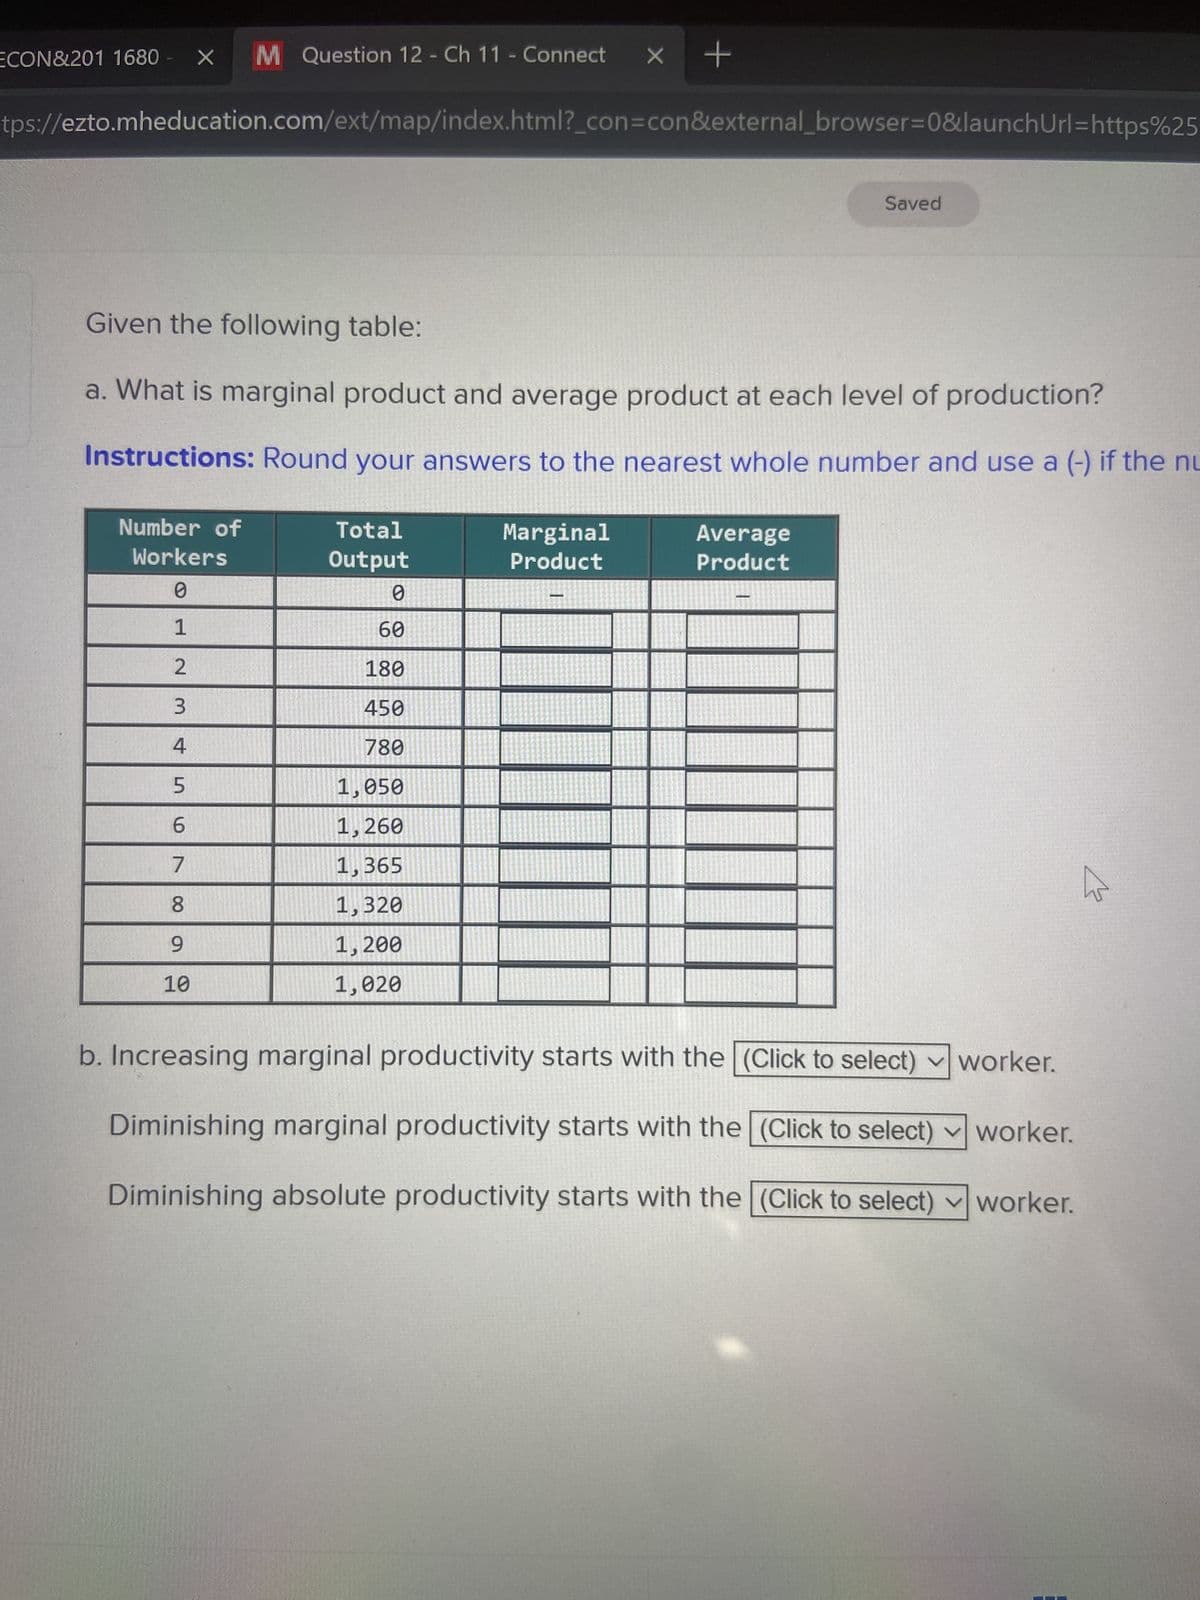 M Question 12 - Ch 11 - Connect X +
tps://ezto.mheducation.com/ext/map/index.html?_con=con&external browser=0&launch Url=https%25
ECON&201 1680
X
Given the following table:
a. What is marginal product and average product at each level of production?
Instructions: Round your answers to the nearest whole number and use a (-) if the nu
Number of
Workers
0
1
2
3
4
5
6
7
8
9
10
Total
Output
0
60
180
450
780
1,050
1,260
1,365
1,320
1,200
1,020
Marginal
Product
Saved
Average
Product
b. Increasing marginal productivity starts with the (Click to select)
worker.
Diminishing marginal productivity starts with the (Click to select) worker.
Diminishing absolute productivity starts with the (Click to select) ✓ worker.
B